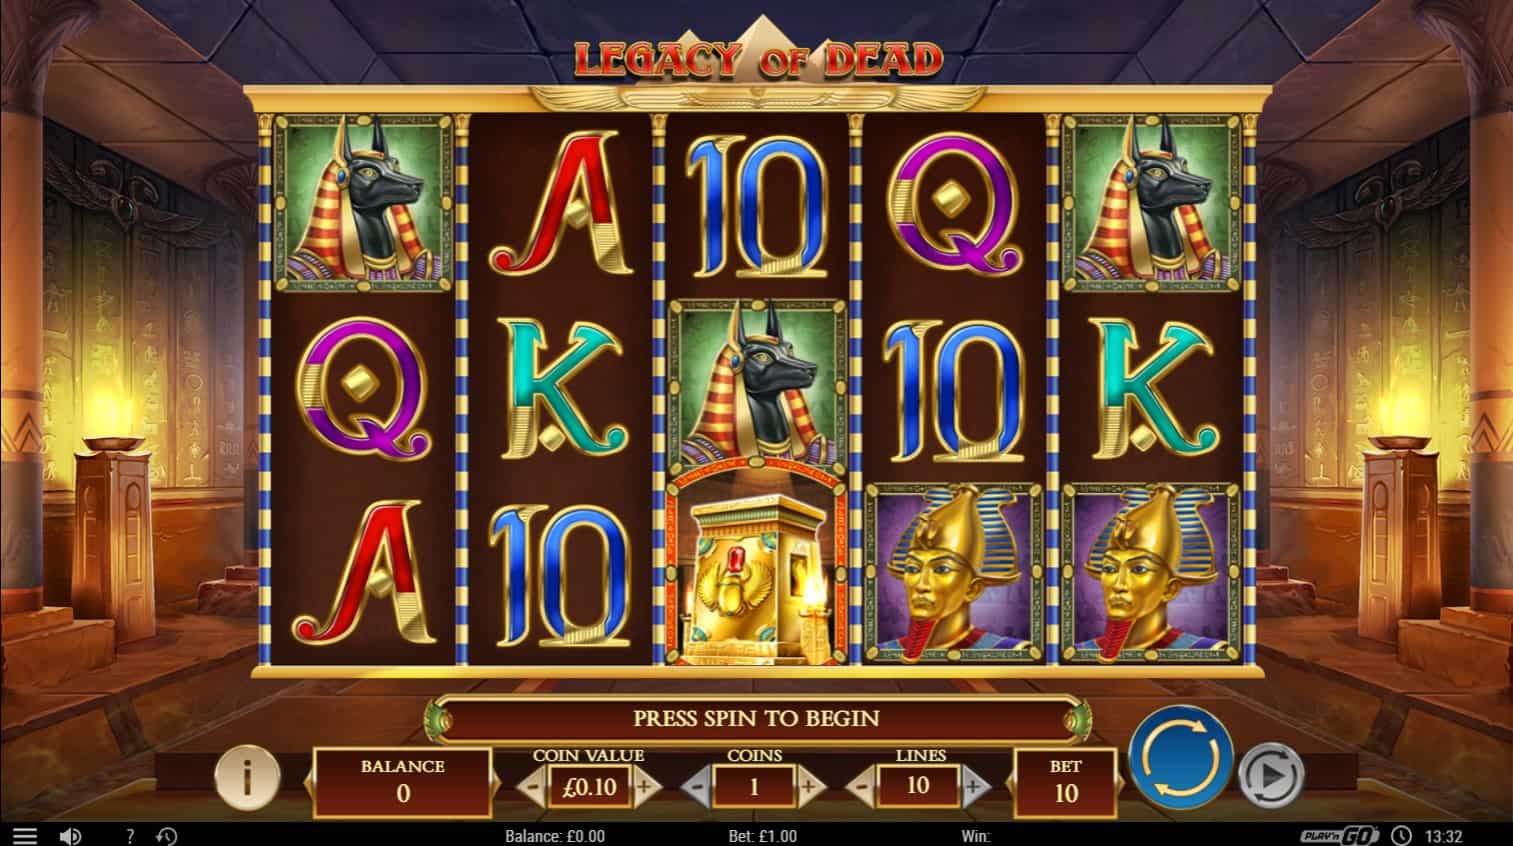 Legacy of Dead Play N Go Slot Review at E-Vegas.com